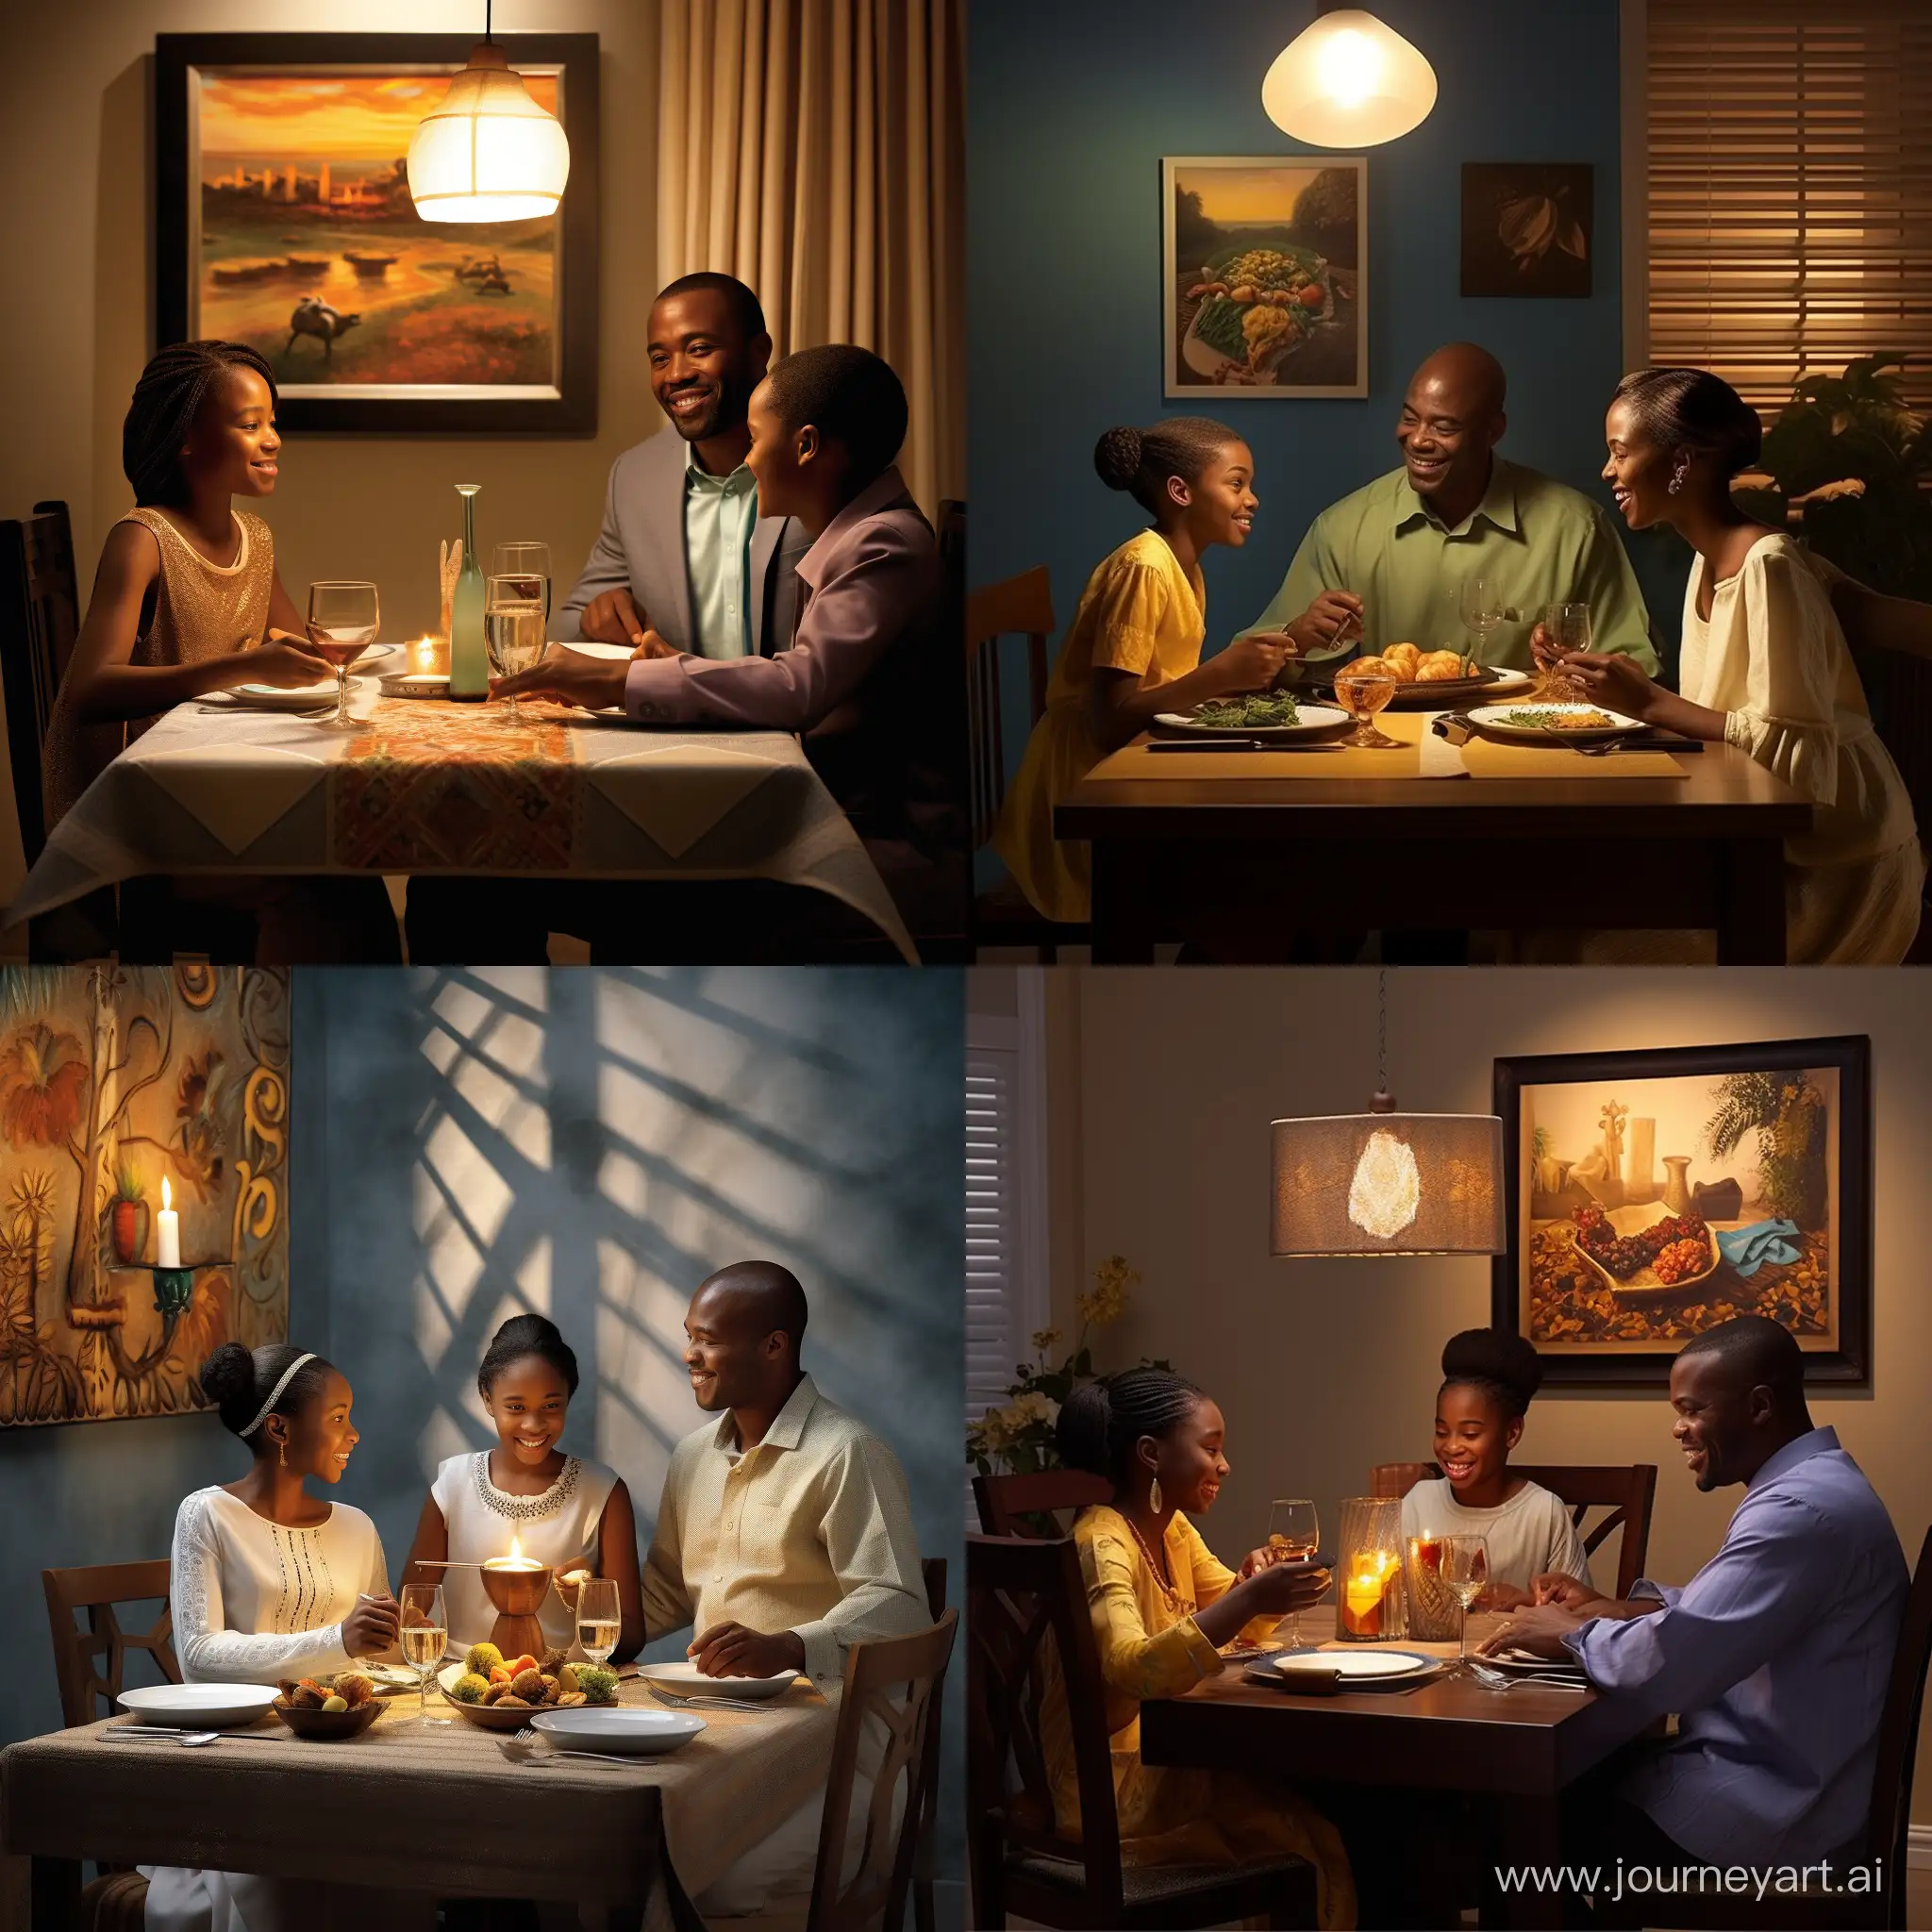 Create a professional and heartwarming photograph showcasing an African family's dining experience. The father, with a handsome and dignified presence, shares a delightful meal with his lovely wife and daughter in a dining room painted in serene ice blue. Warm, soft lighting from above bathes the scene in a cozy ambiance, casting a natural glow on their real human skin textures. The dining table adorned with fresh fruits adds a touch of vibrancy to the familial connection captured in this hyper-realistic image